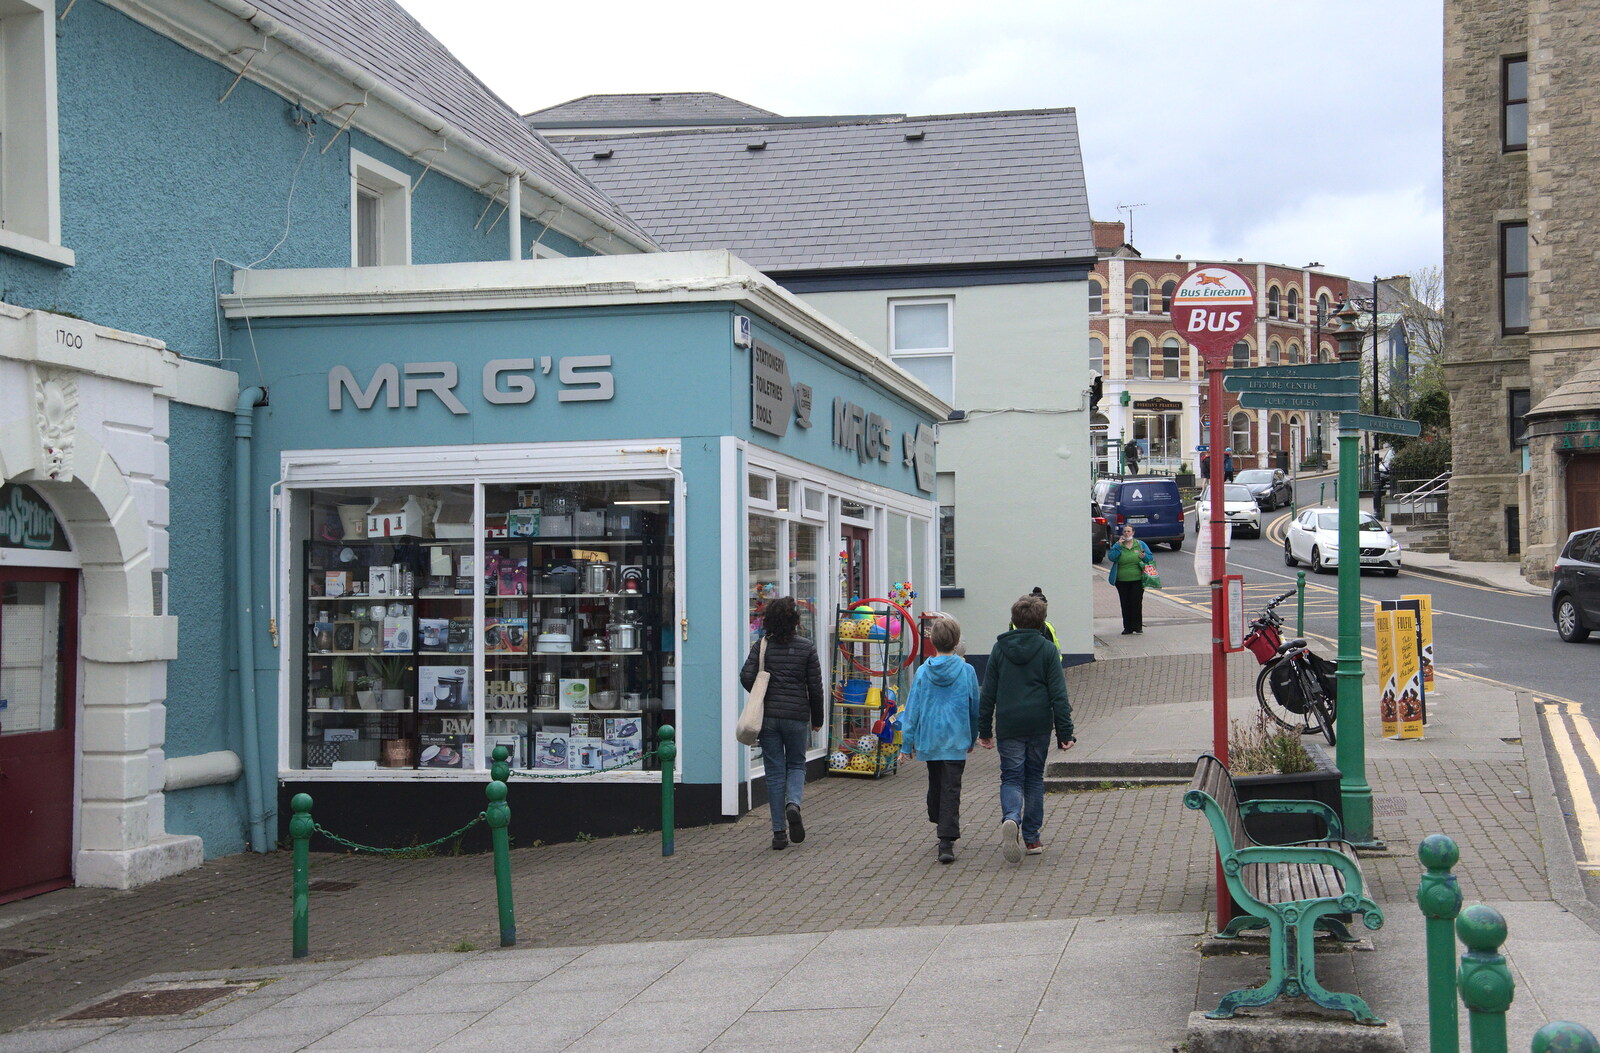 Fern and the boys head into Mr G's to buy stuff from Manorhamilton and Bundoran, Leitrim and Donegal, Ireland - 16th April 2022